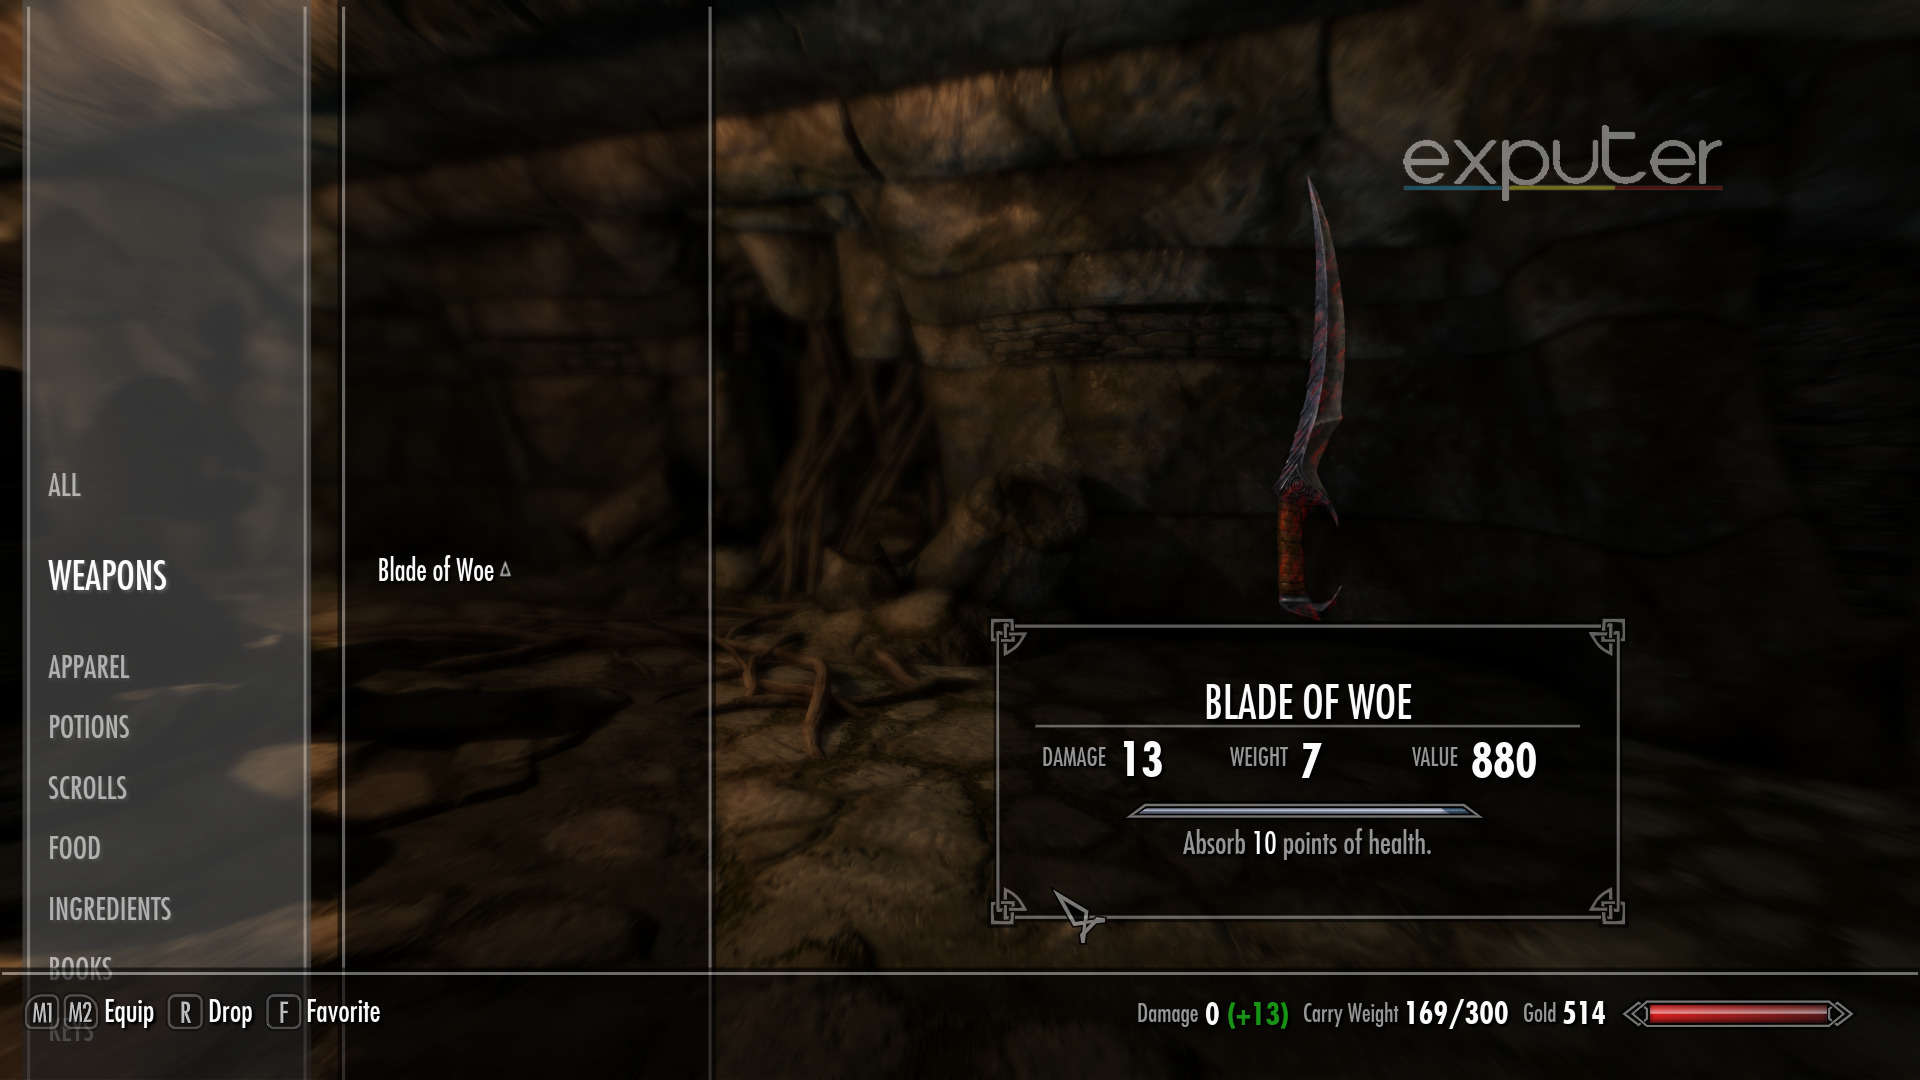 In-game Blade of Woe